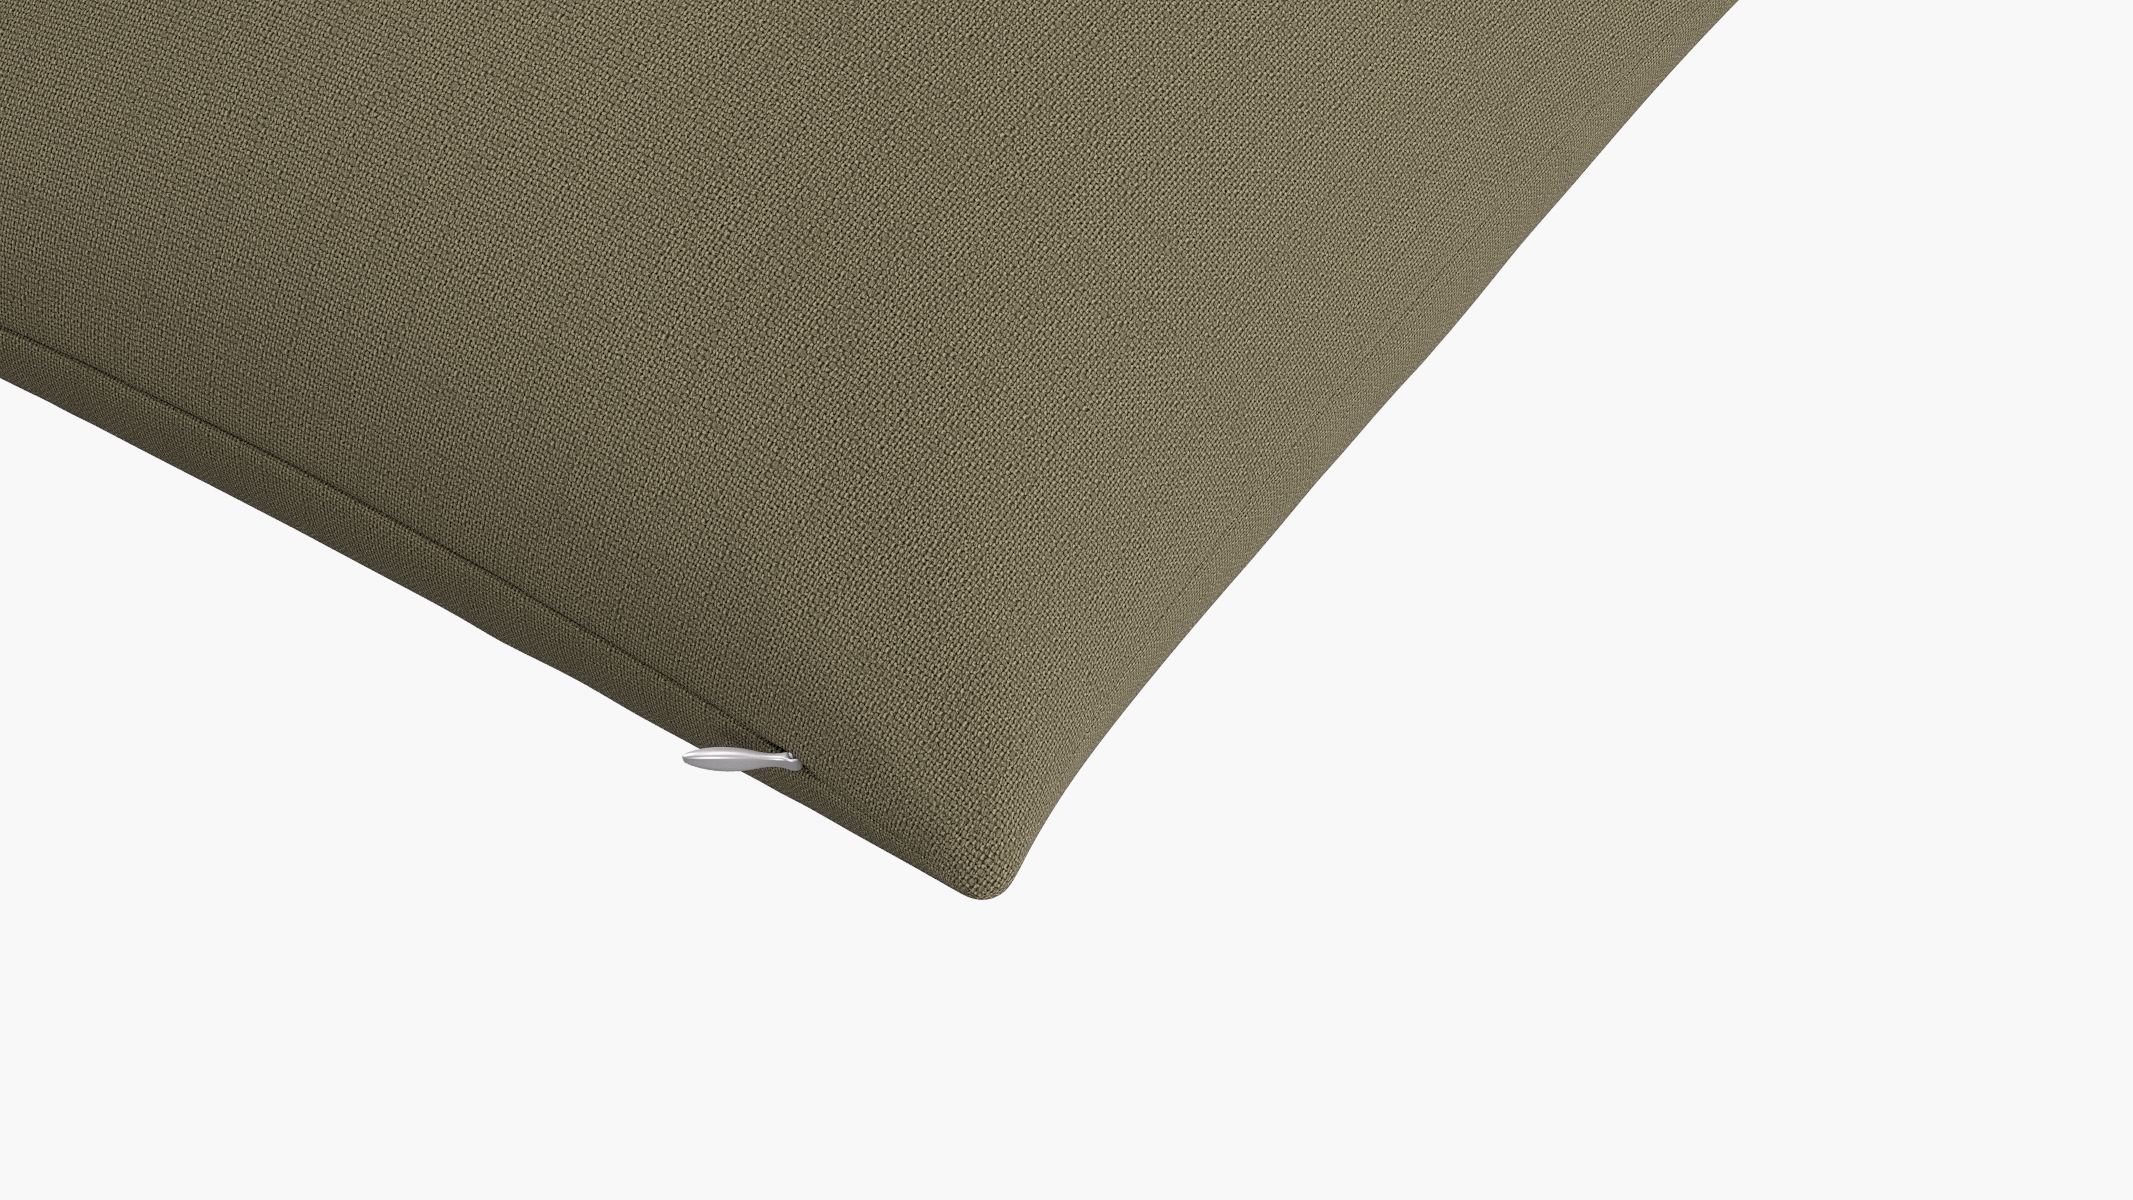 Throw Pillow, Olive Linen, 18" x 18" - Image 1